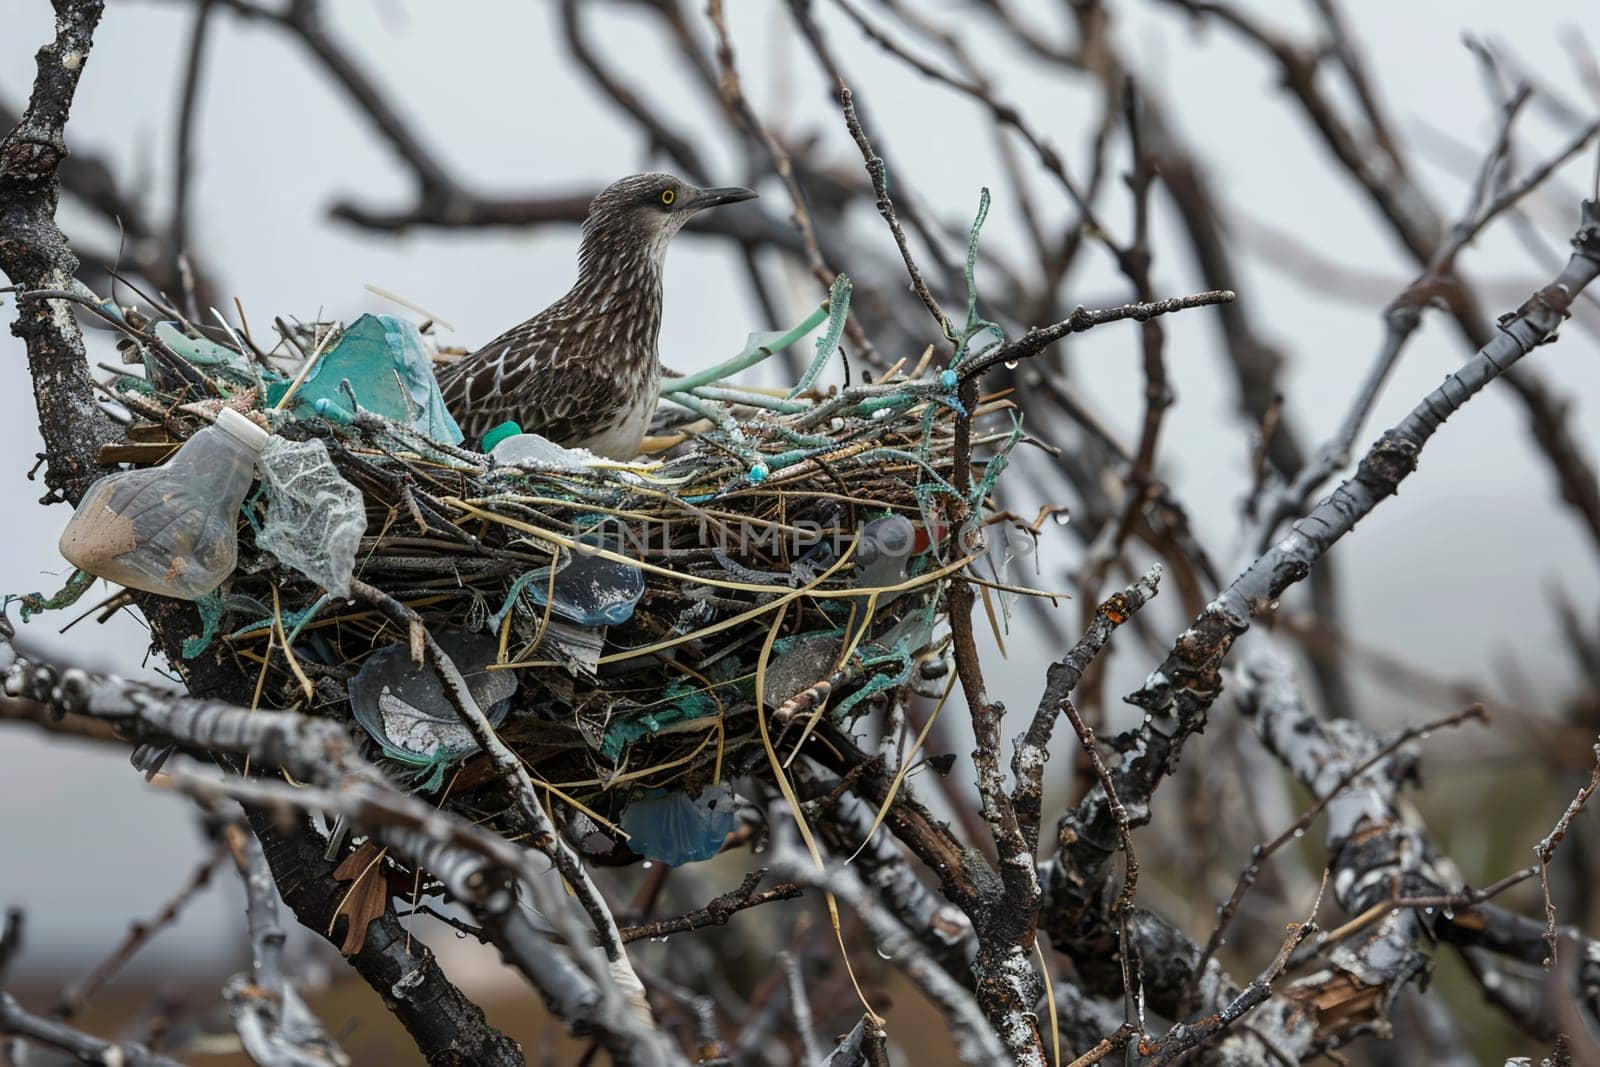 Bird perched atop a nest constructed from discarded plastic, highlighting the impact of pollution on nature